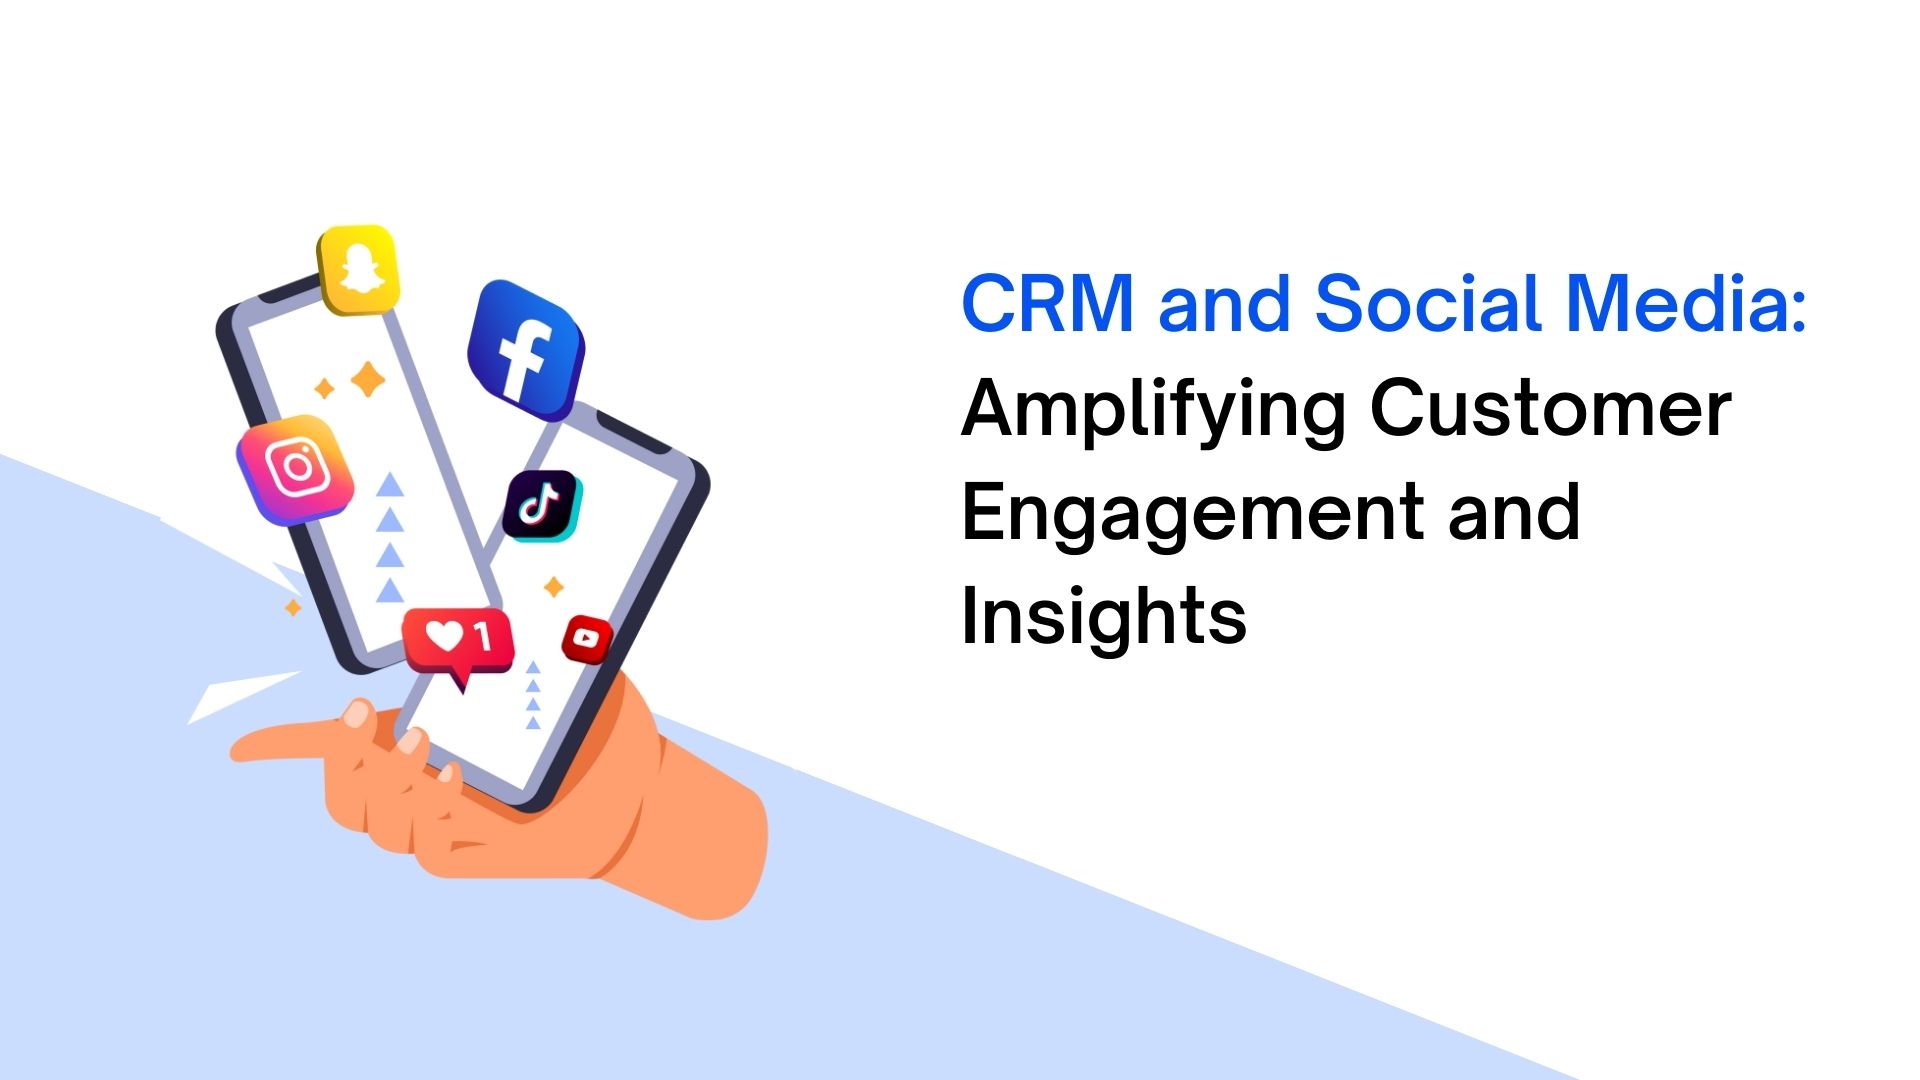 CRM and Social Media: A Dynamic Duo Amplifying Customer Engagement and Insights